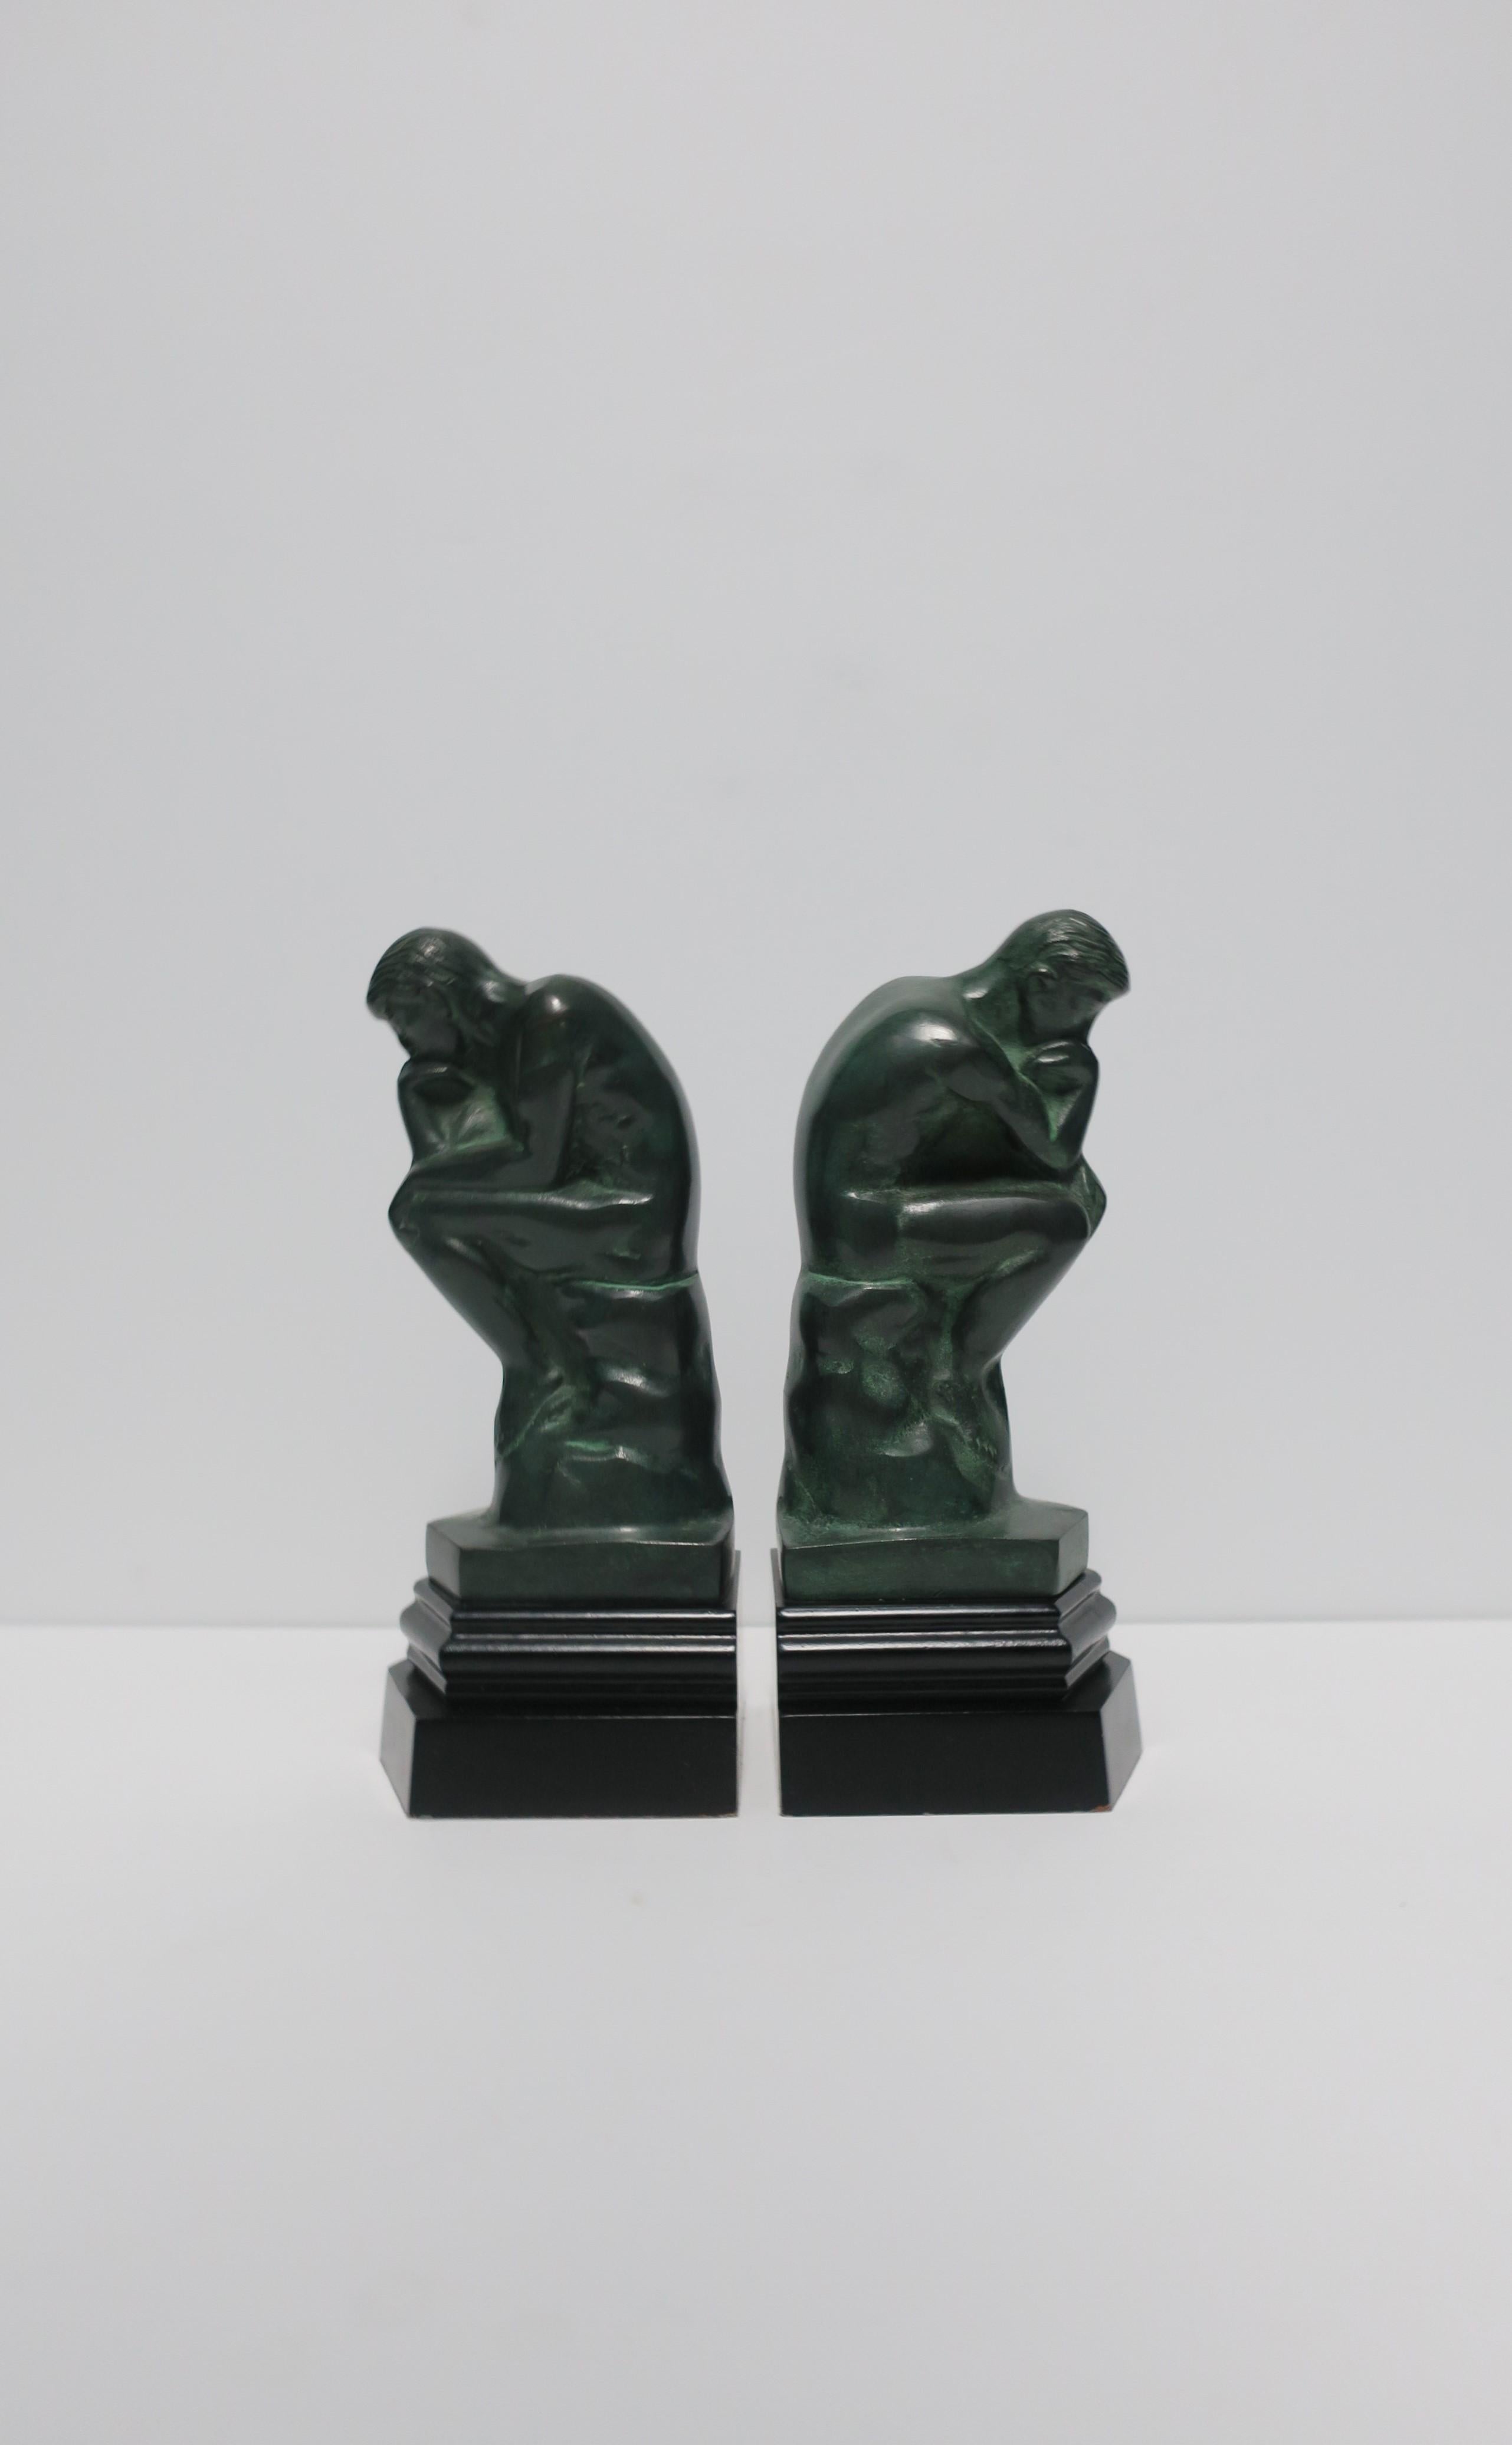 A great pair of 'Thinker' male figurative sculpture bookends in dark green with black bases, circa late 20th century. Each measuring 9.25